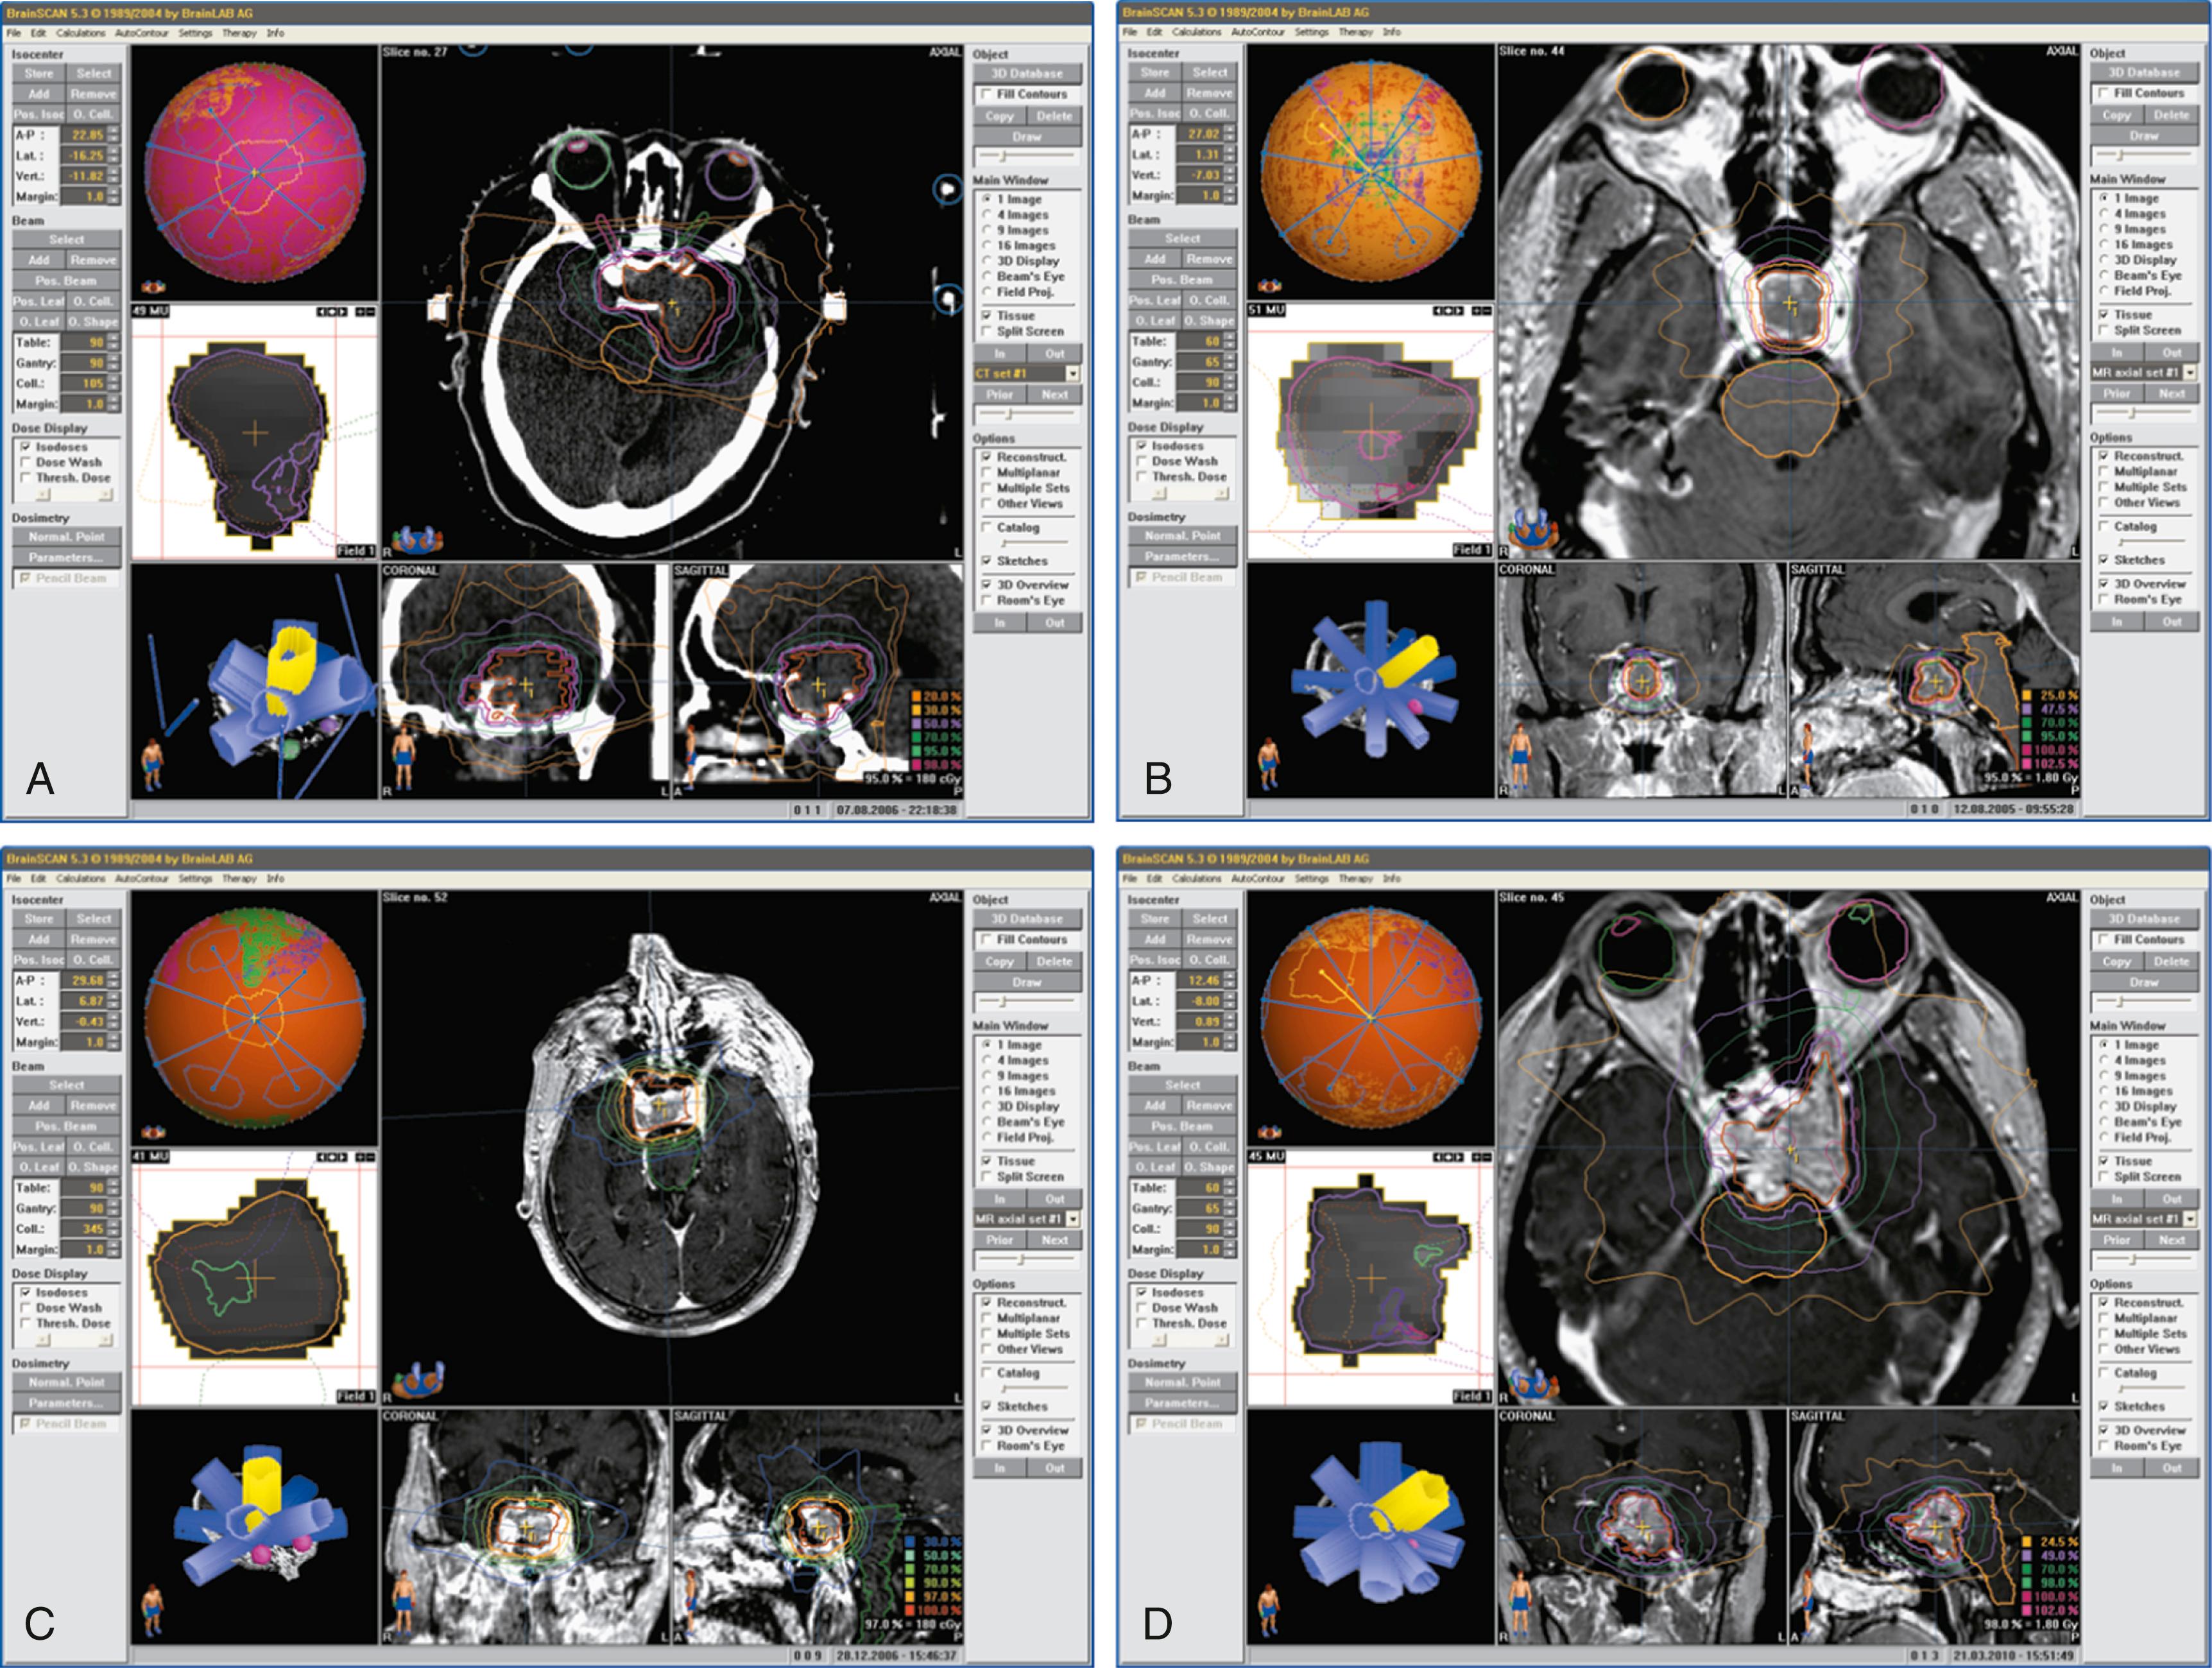 FIGURE 91.1, Image-guided radiosurgical planning for pituitary adenomas. (A) A 53-year-old woman presenting with worsening headaches and galactorrhea was found to have a 3.5-cm prolactinoma with left cavernous sinus extension. After subtotal transcranial resection, she received 25 Gy to the residual tumor, which successfully induced biochemical remission. (B) A 39-year-old man presenting with acromegaly and a 1.5-cm growth hormone–secreting adenoma. After subtotal transsphenoidal resection, he received 18 Gy and experienced hypopituitarism and a moderate decrease in IGF-1, still necessitating medical therapy. (C) An 81-year-old man presenting with a 1.6-cm nonfunctional pituitary adenoma treated with 16 Gy after subtotal resection. He has intact visual function without tumor progression or hypopituitarism. (D) A 72-year-old man with a 3-cm NFPA with suprasellar and cavernous sinus extension and recurrence after multiple surgeries. He was treated with fractionated stereotactic radiosurgery (50.4 Gy over 28 fractions) due to proximity to the optic chiasm; this was successful in halting tumor progression but complicated by a decline in visual function and a sellar hematoma postradiation.